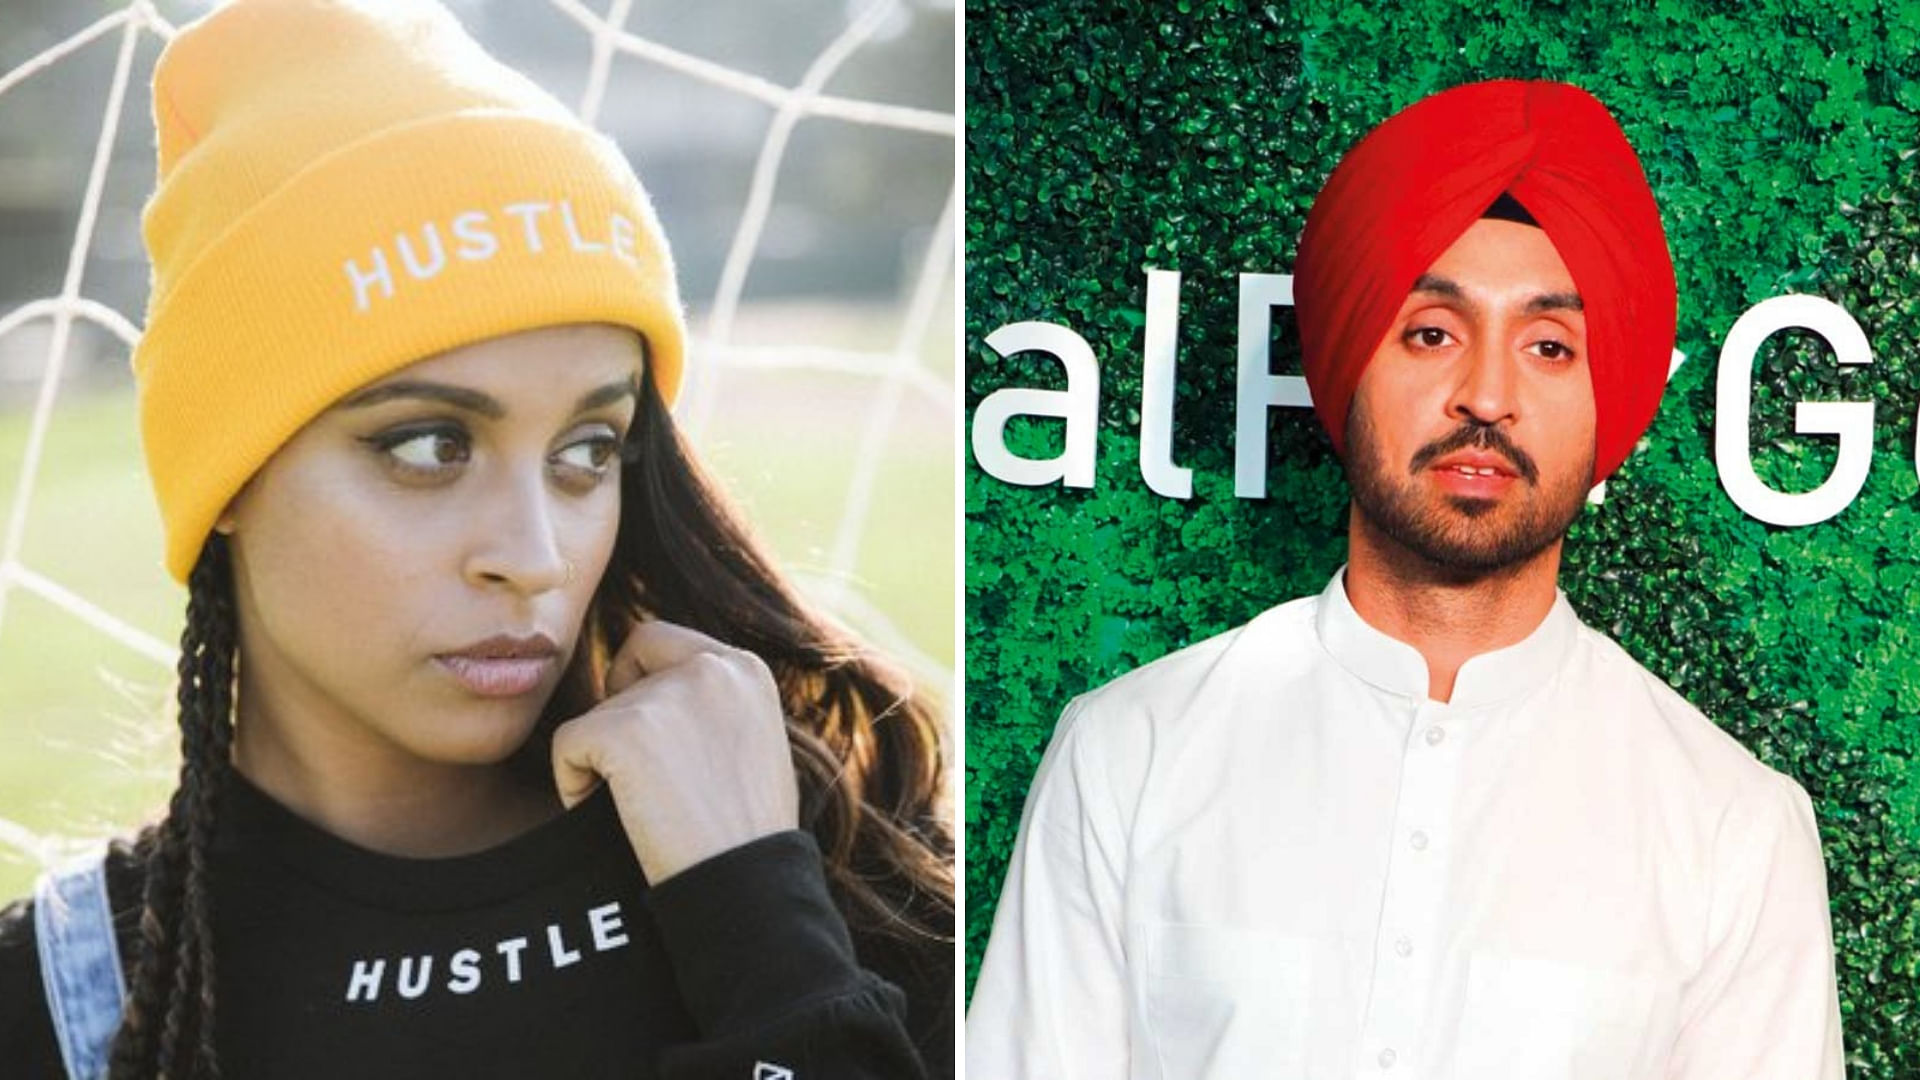 Lilly Singh and Diljit Dosanjh.